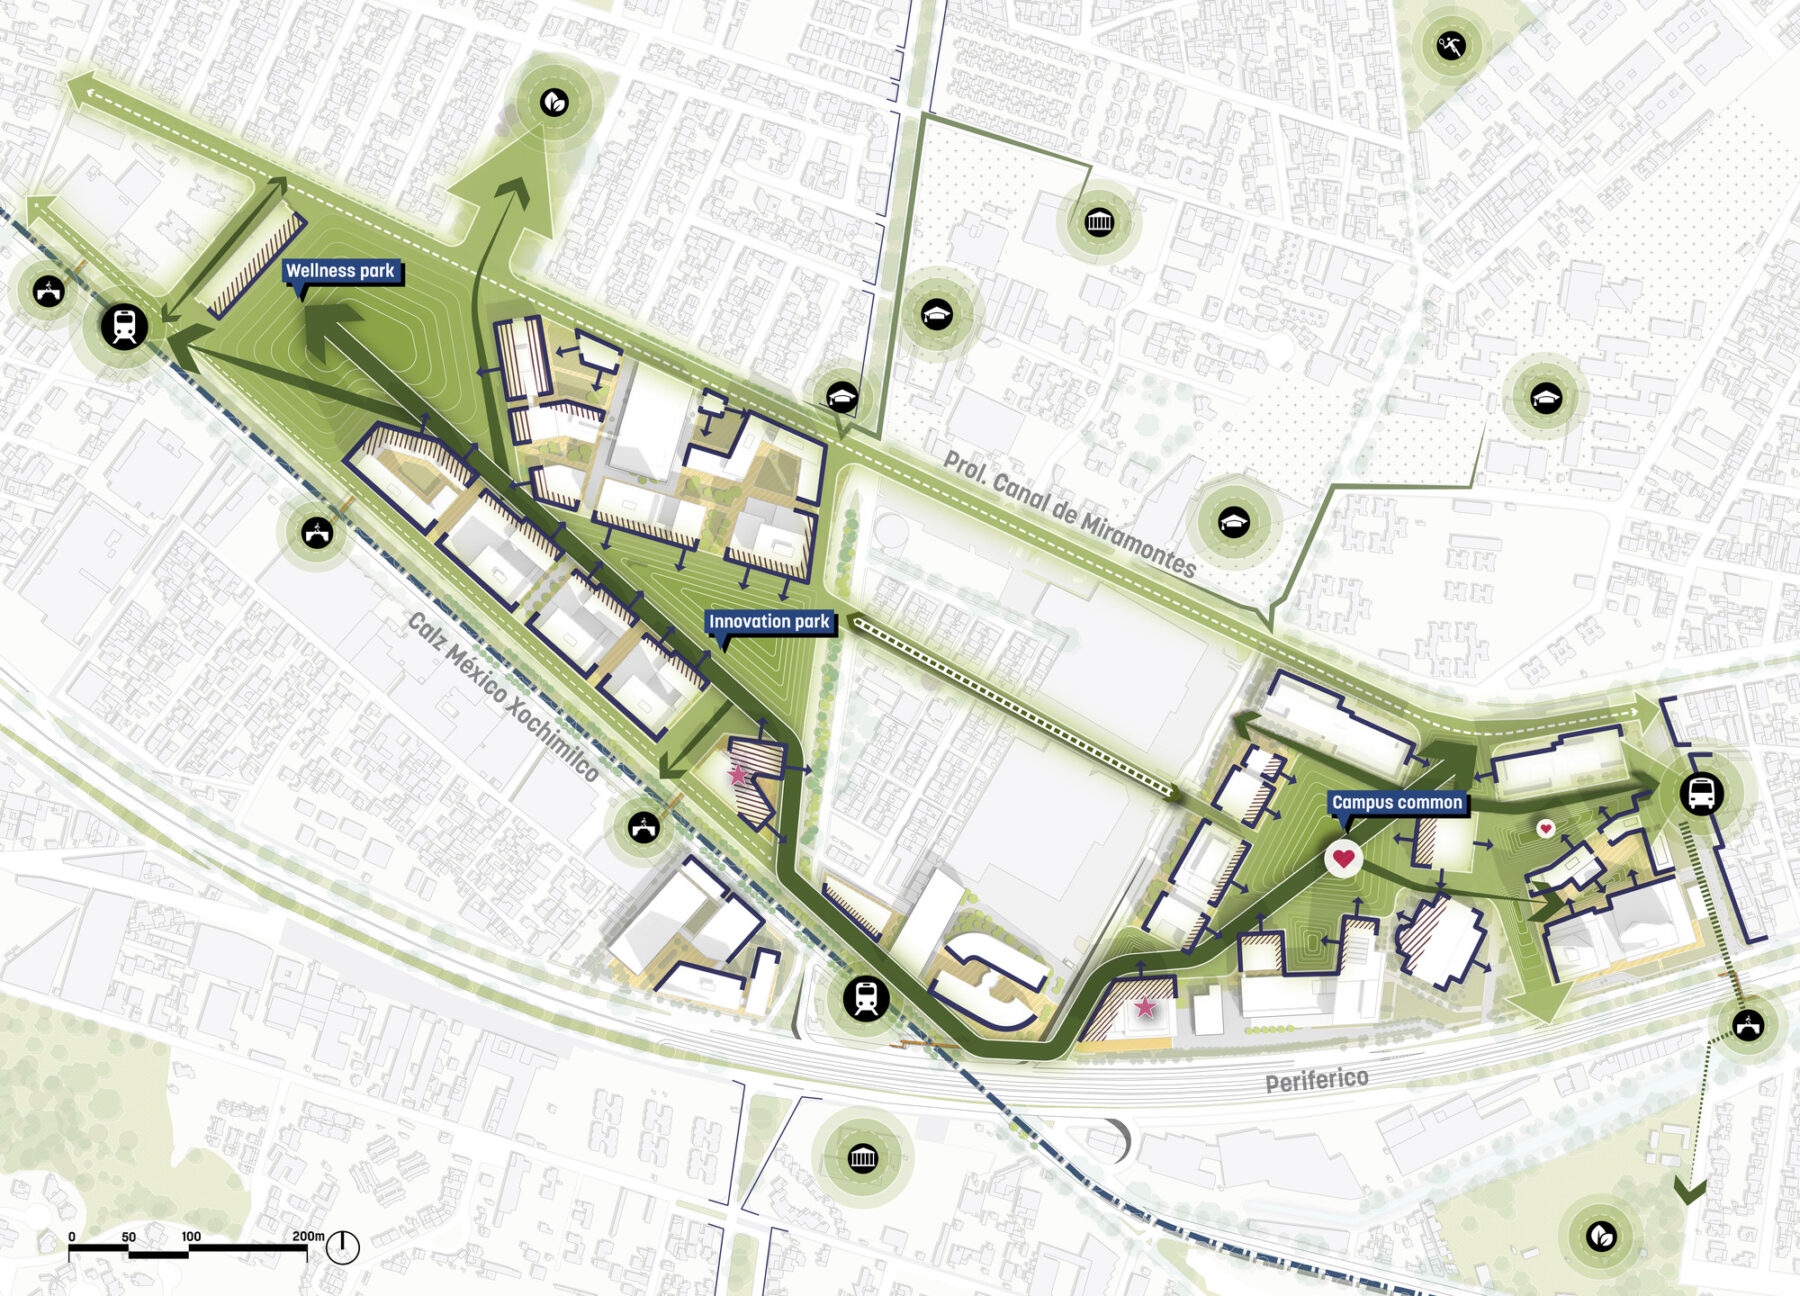 illustrative site plan showing proposed connections